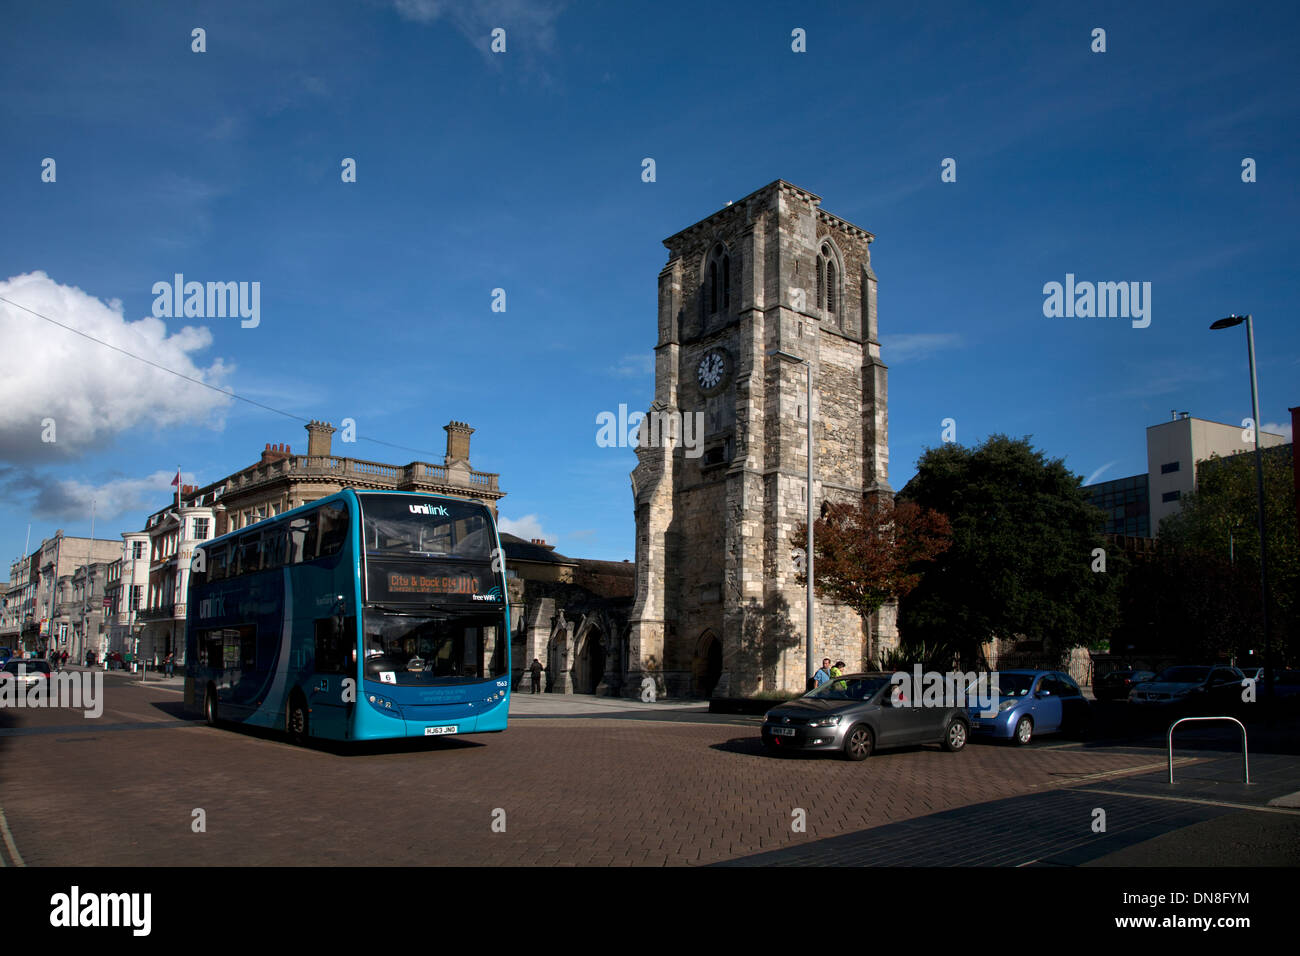 Holyrood chiesa high street old town southampton hampshire Inghilterra Foto Stock